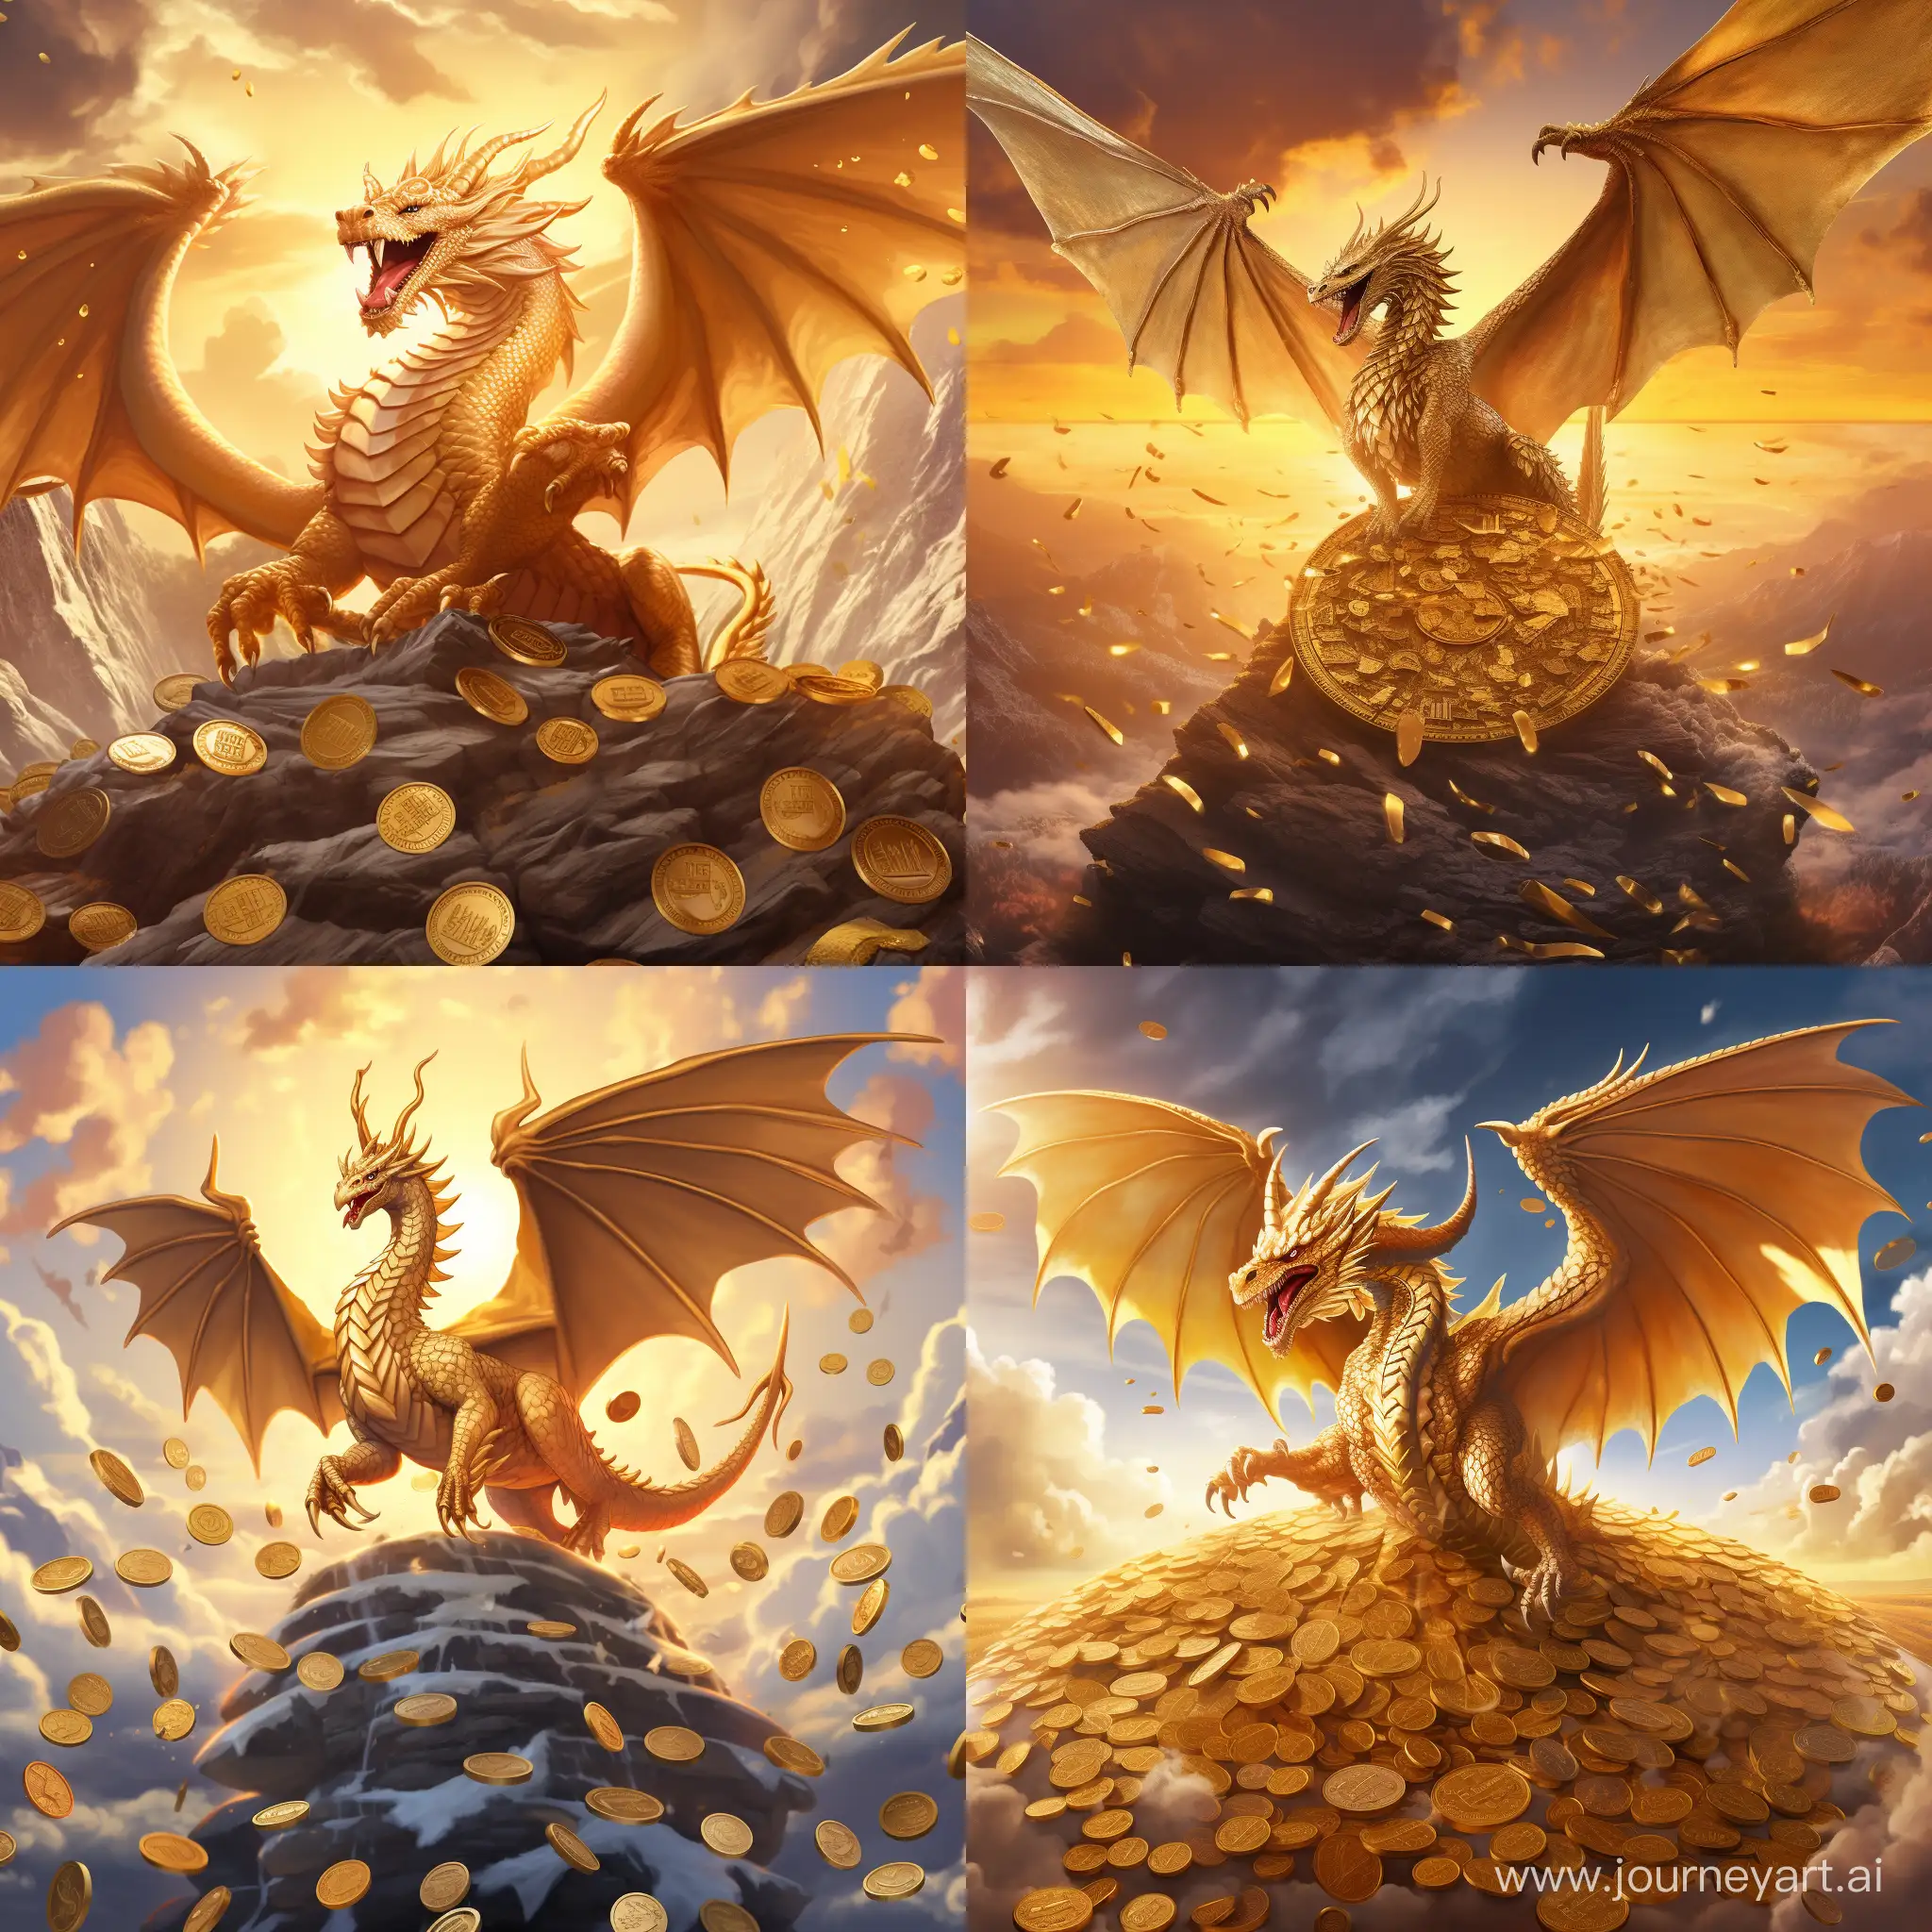 Majestic-Golden-Dragon-Soaring-Amidst-a-Wealth-of-Gold-Coins